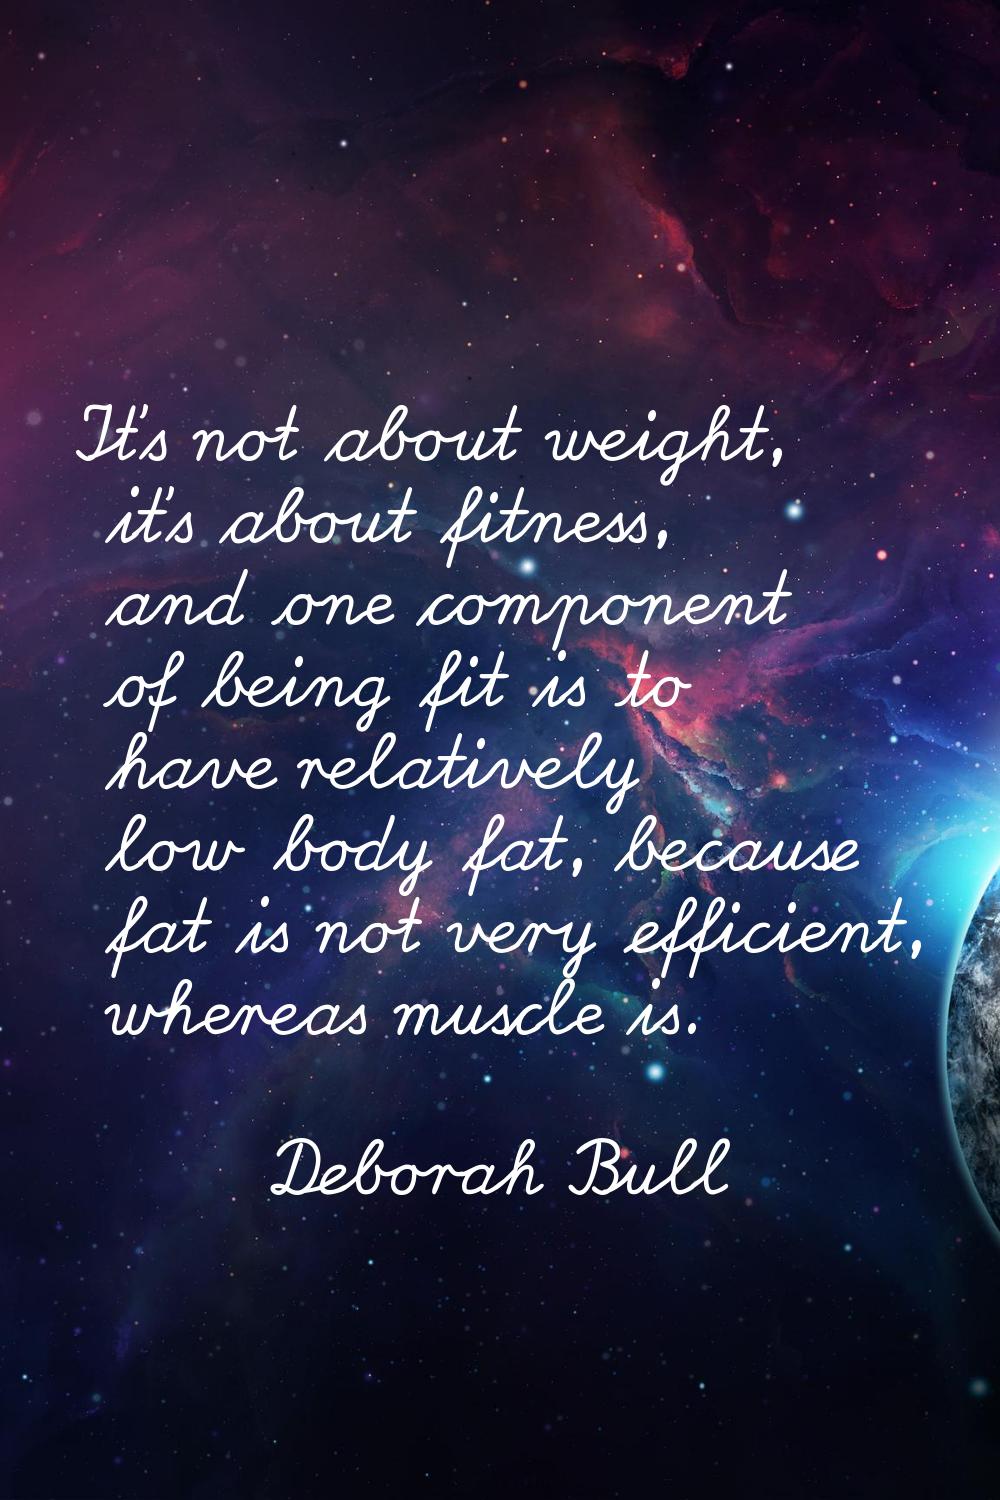 It's not about weight, it's about fitness, and one component of being fit is to have relatively low